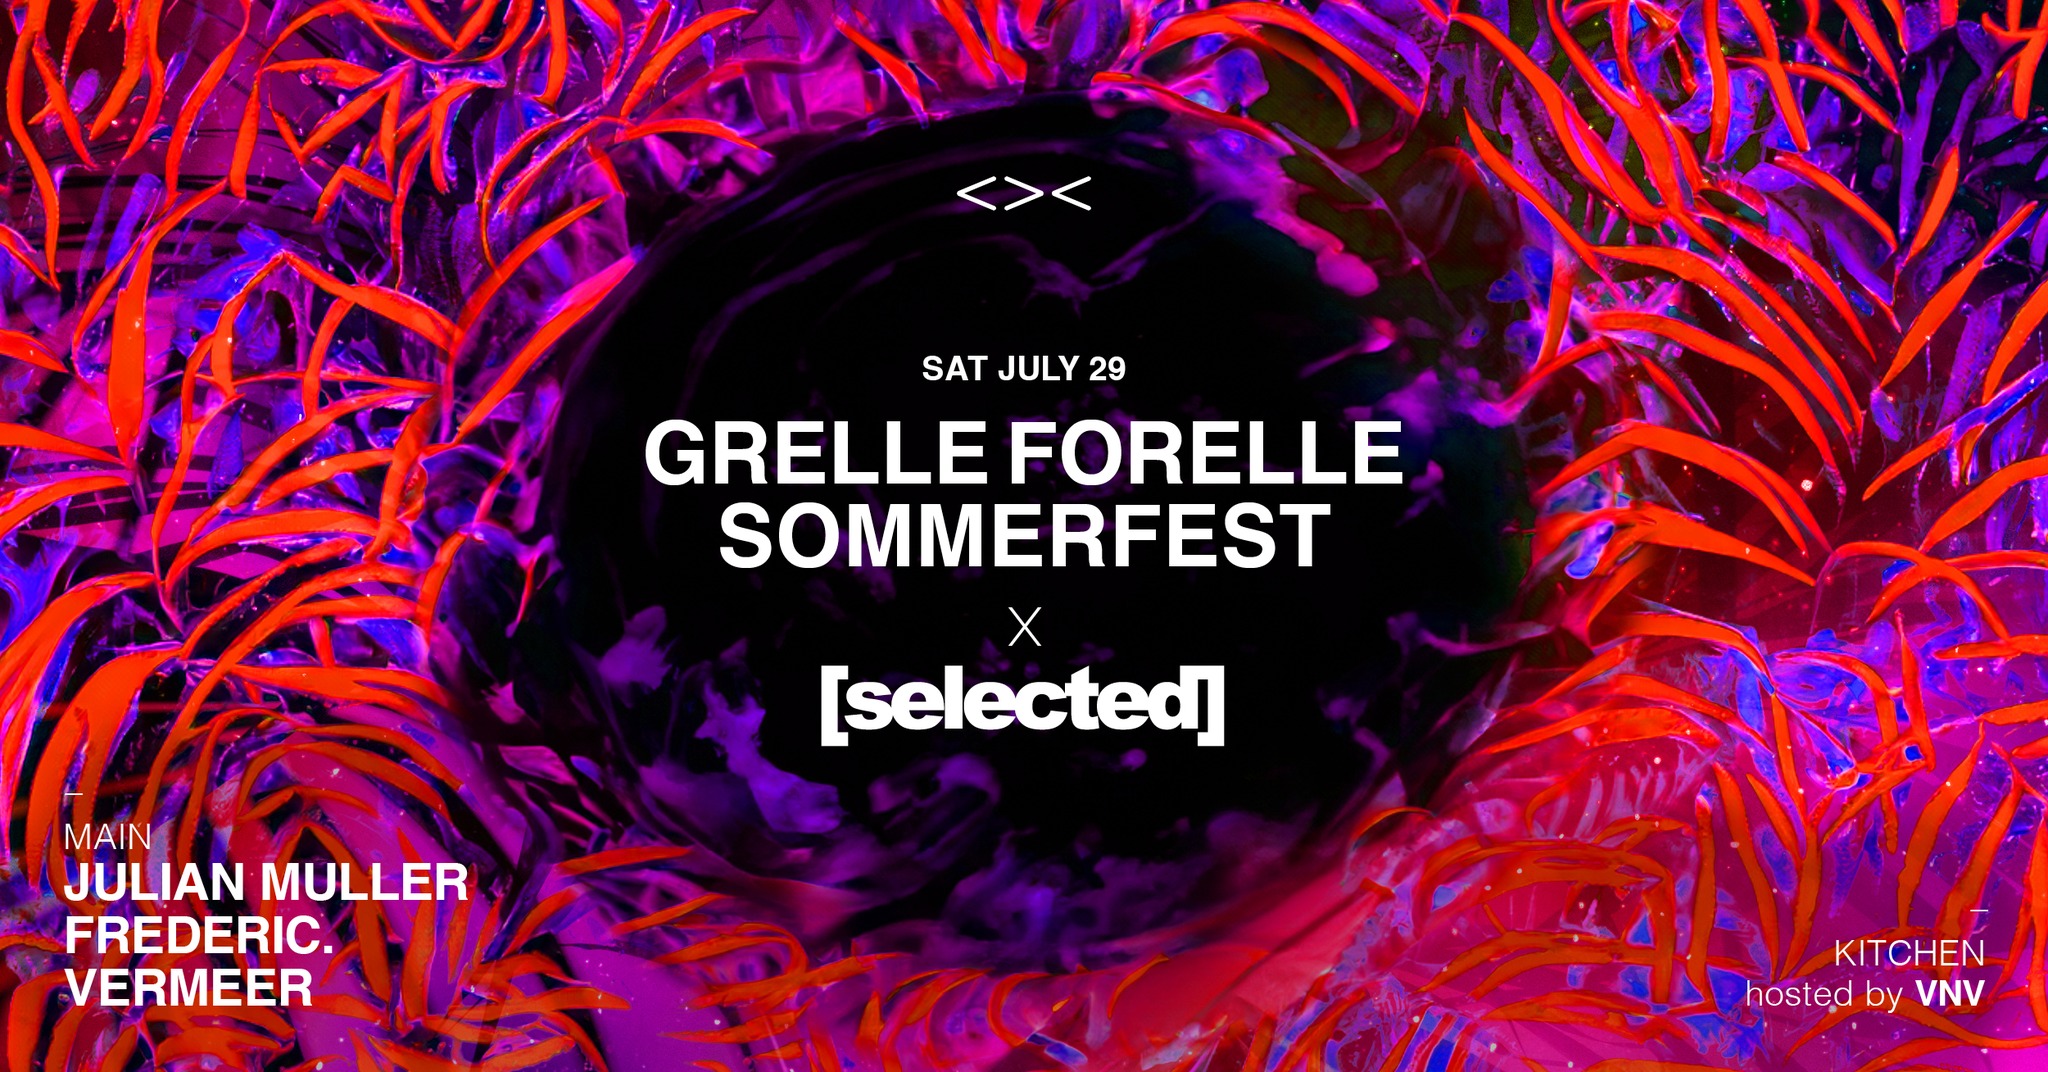 Grelle Forelle Sommerfest X Selected. am 29. July 2023 @ Grelle Forelle.